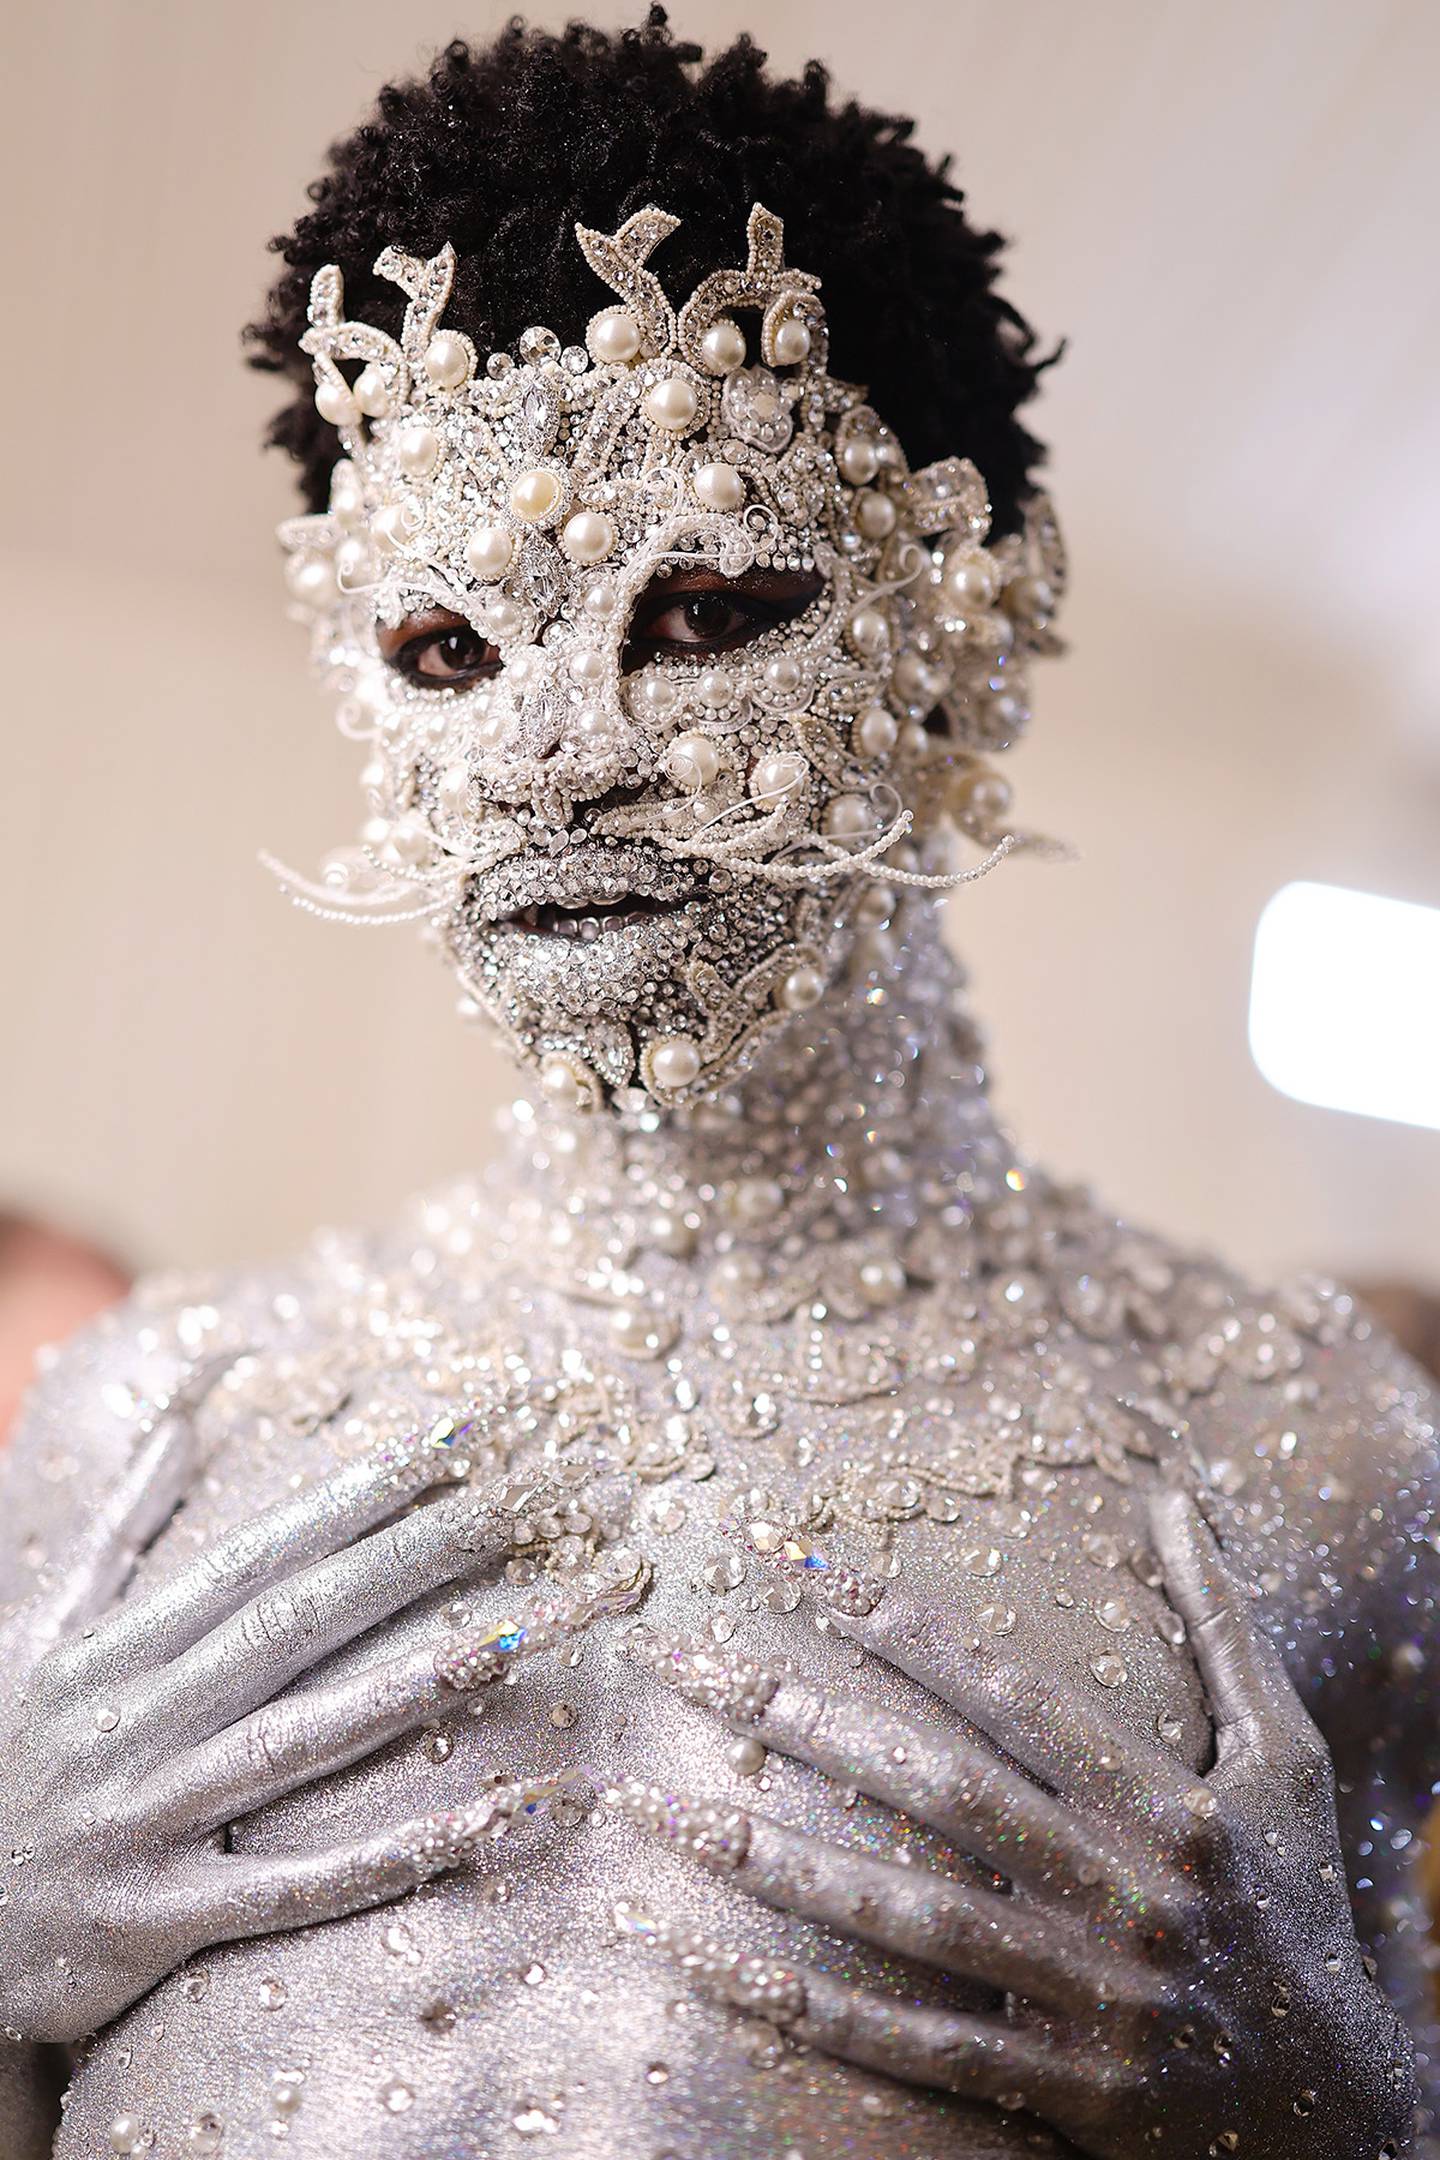 Lil Nas X to the 2023 Met Gala wears a crystal and pearl catsuit by Pat McGrath using Swarovski materials.